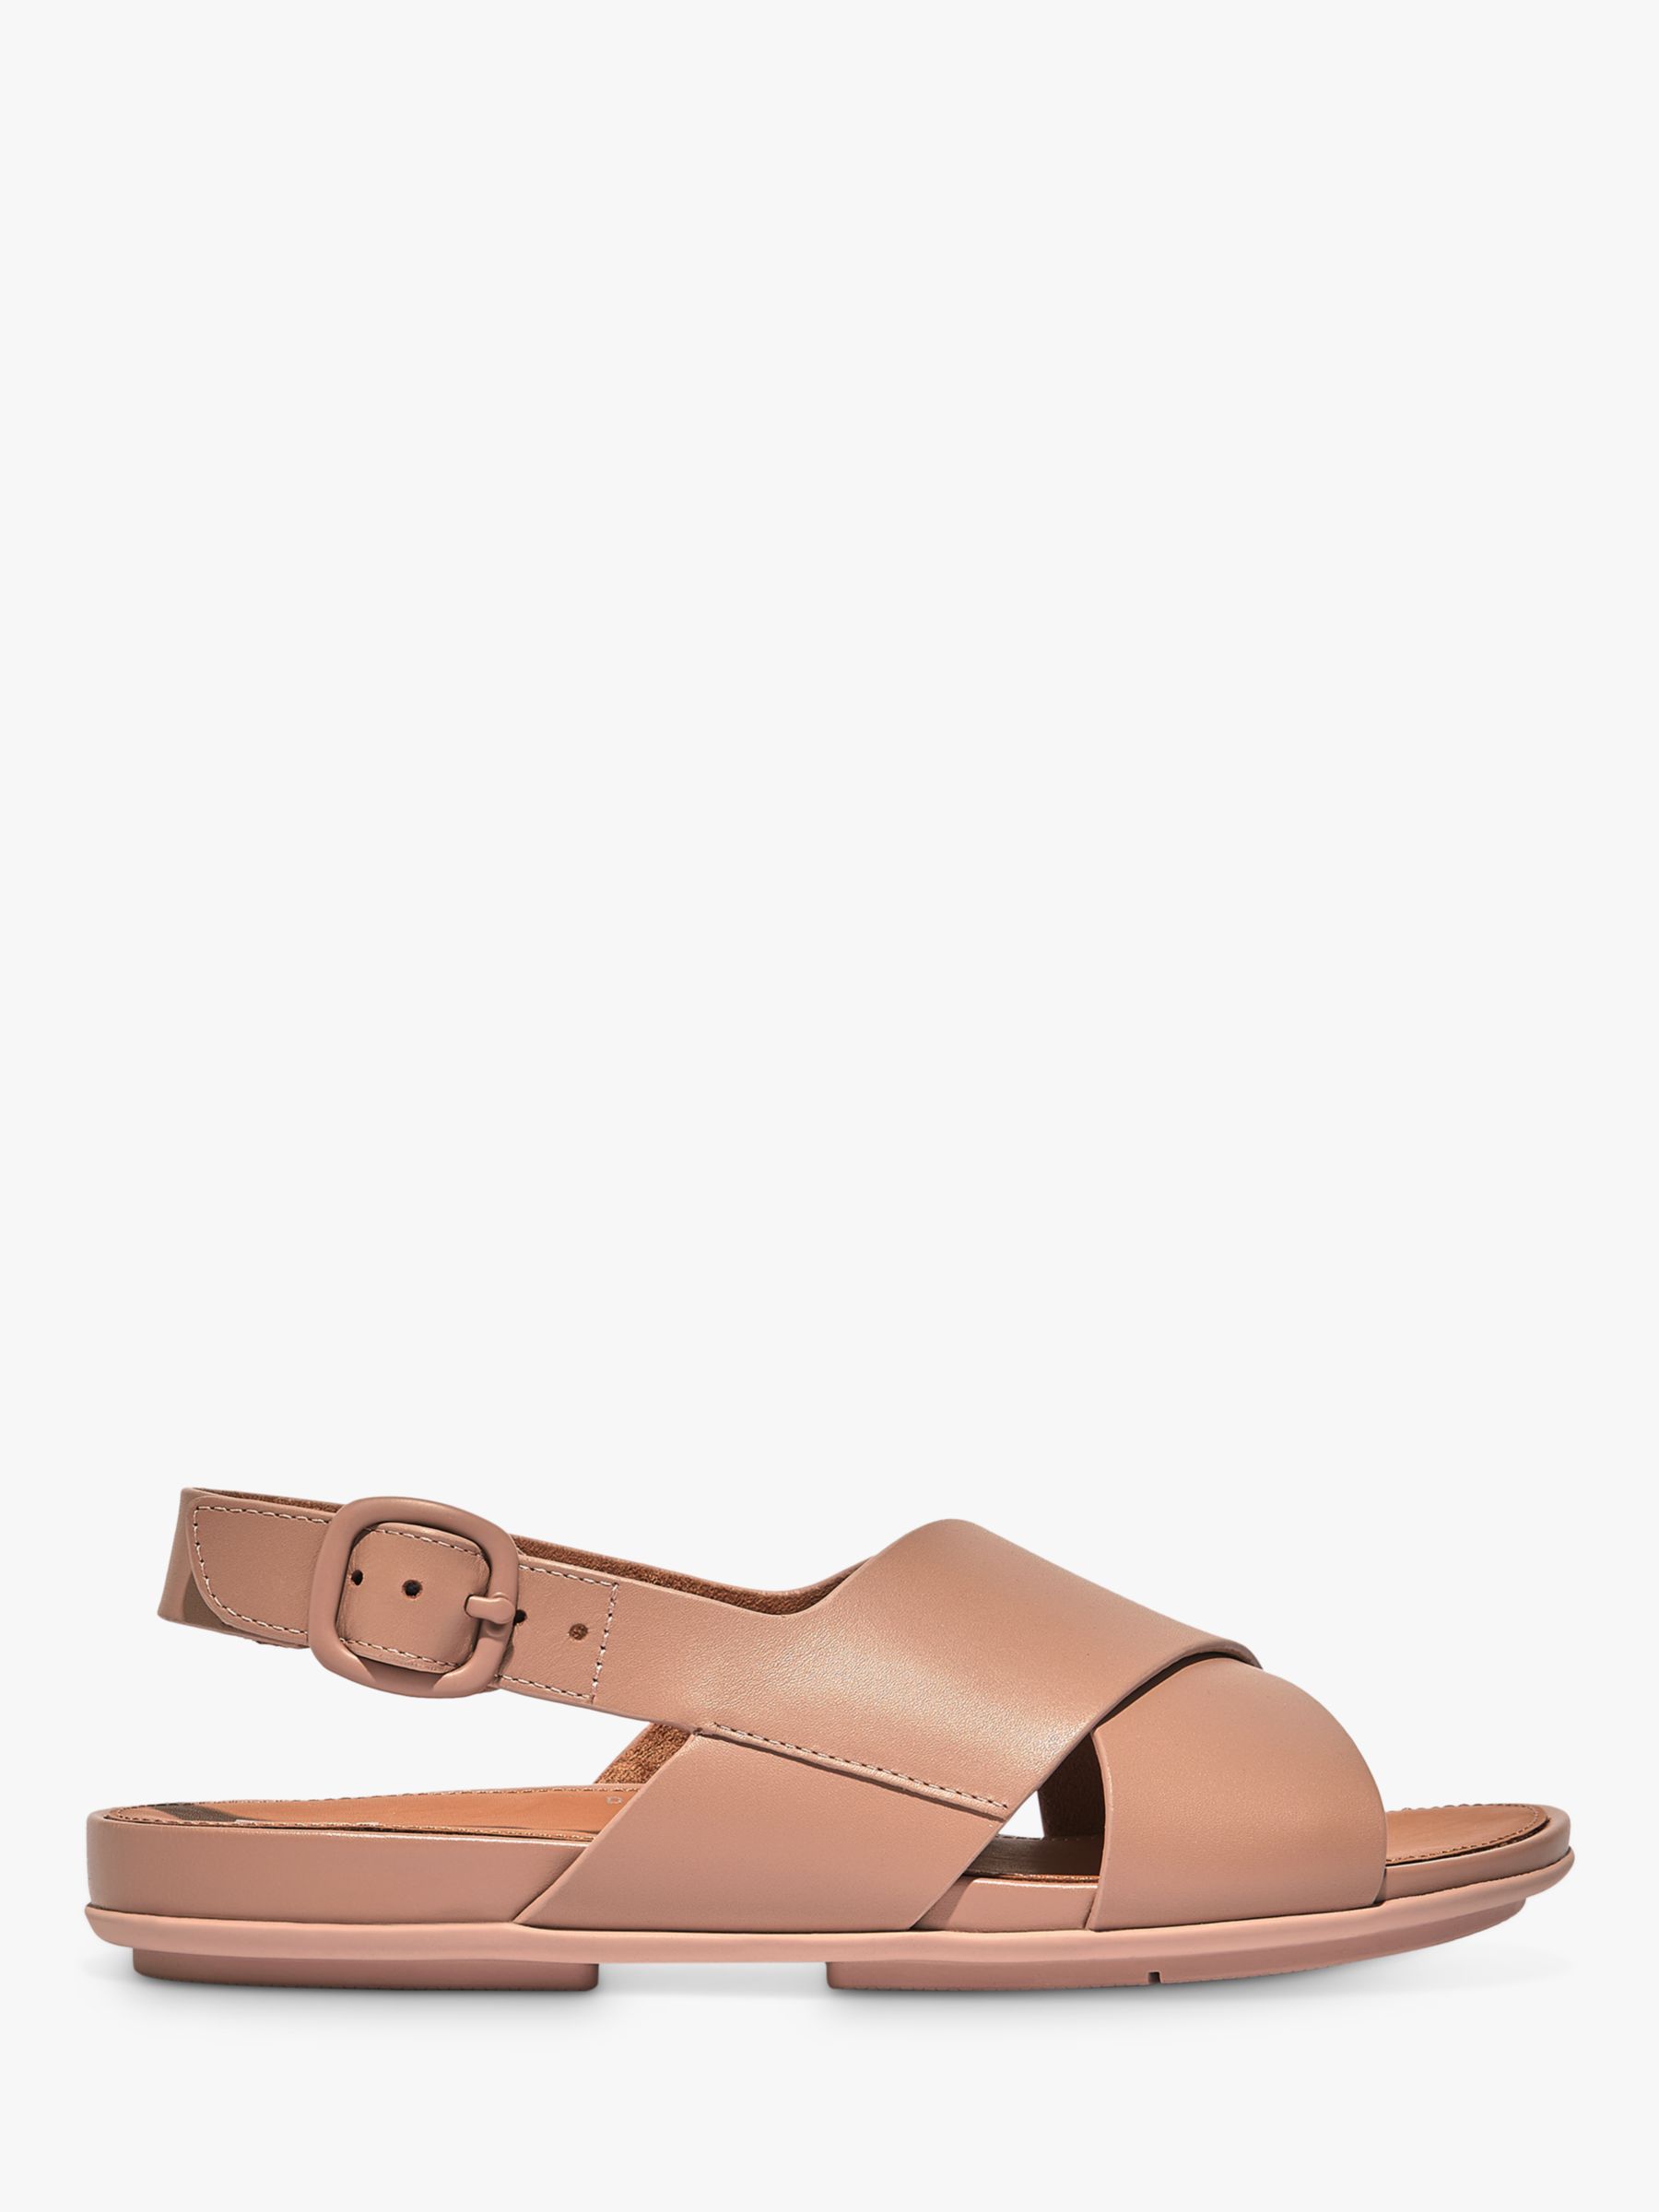 Buy FitFlop Gracie Leather Back Sandals Online at johnlewis.com